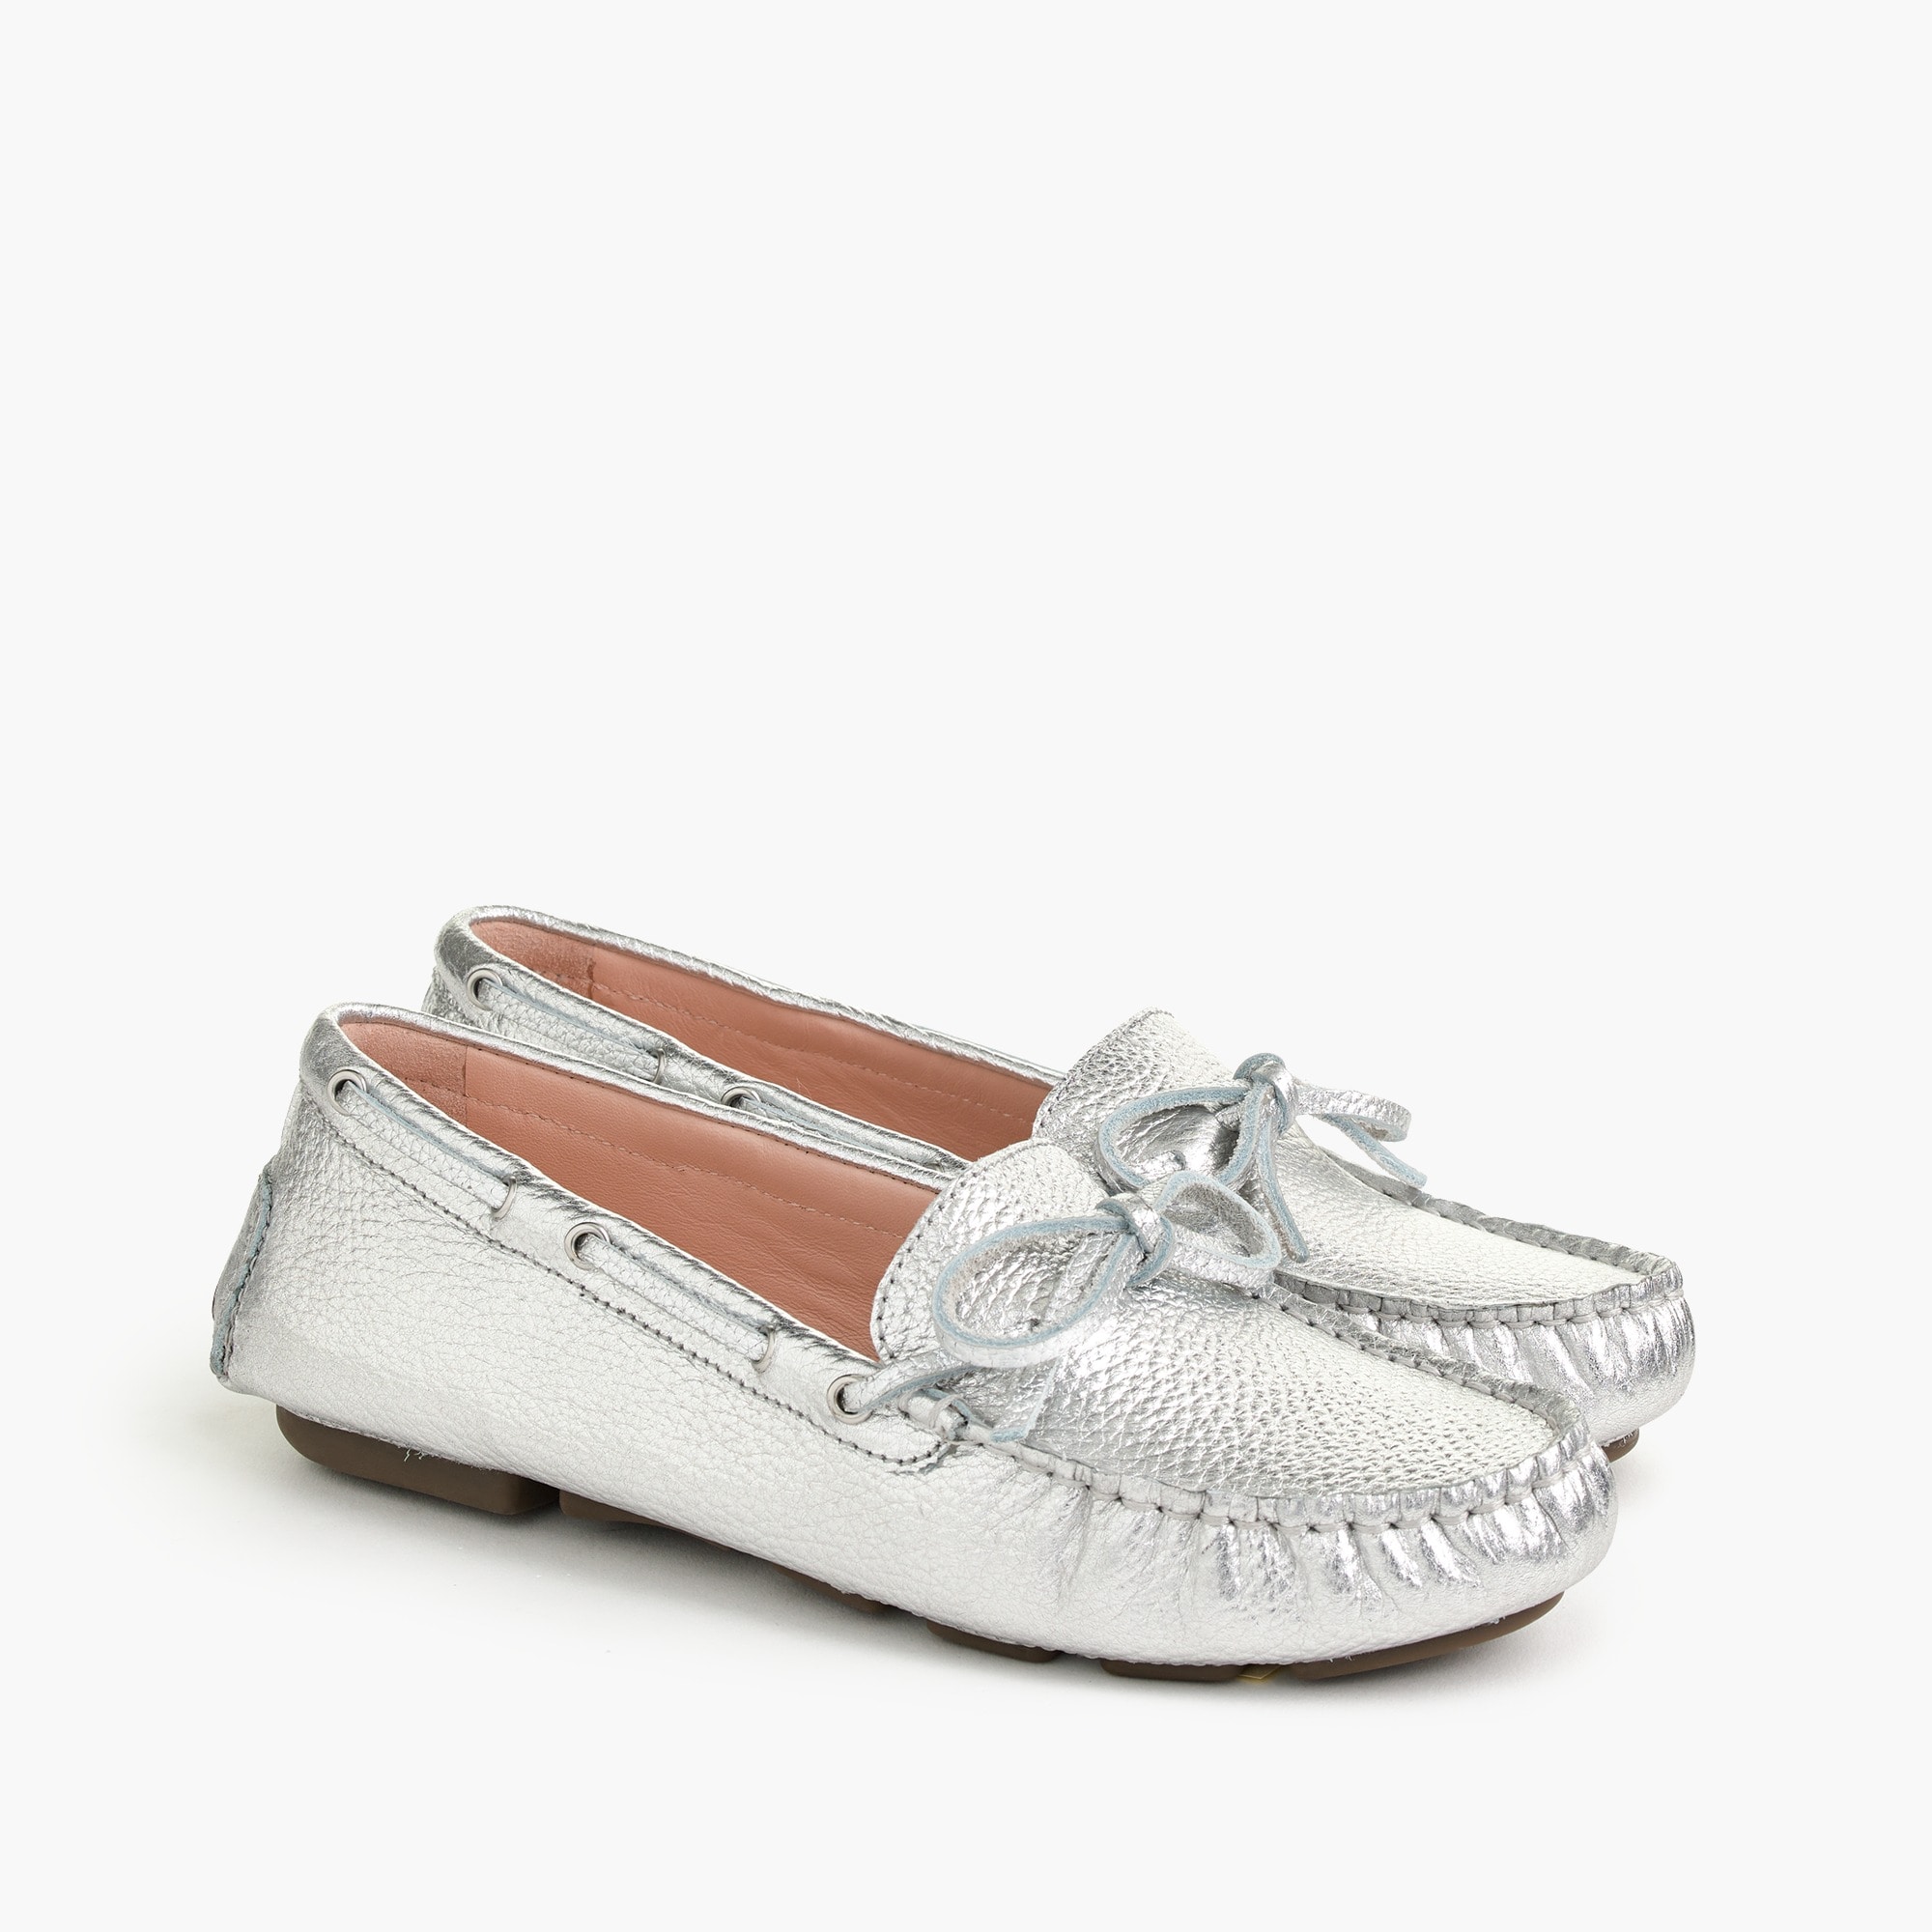 J.Crew: Driving Moccasins In Leather 